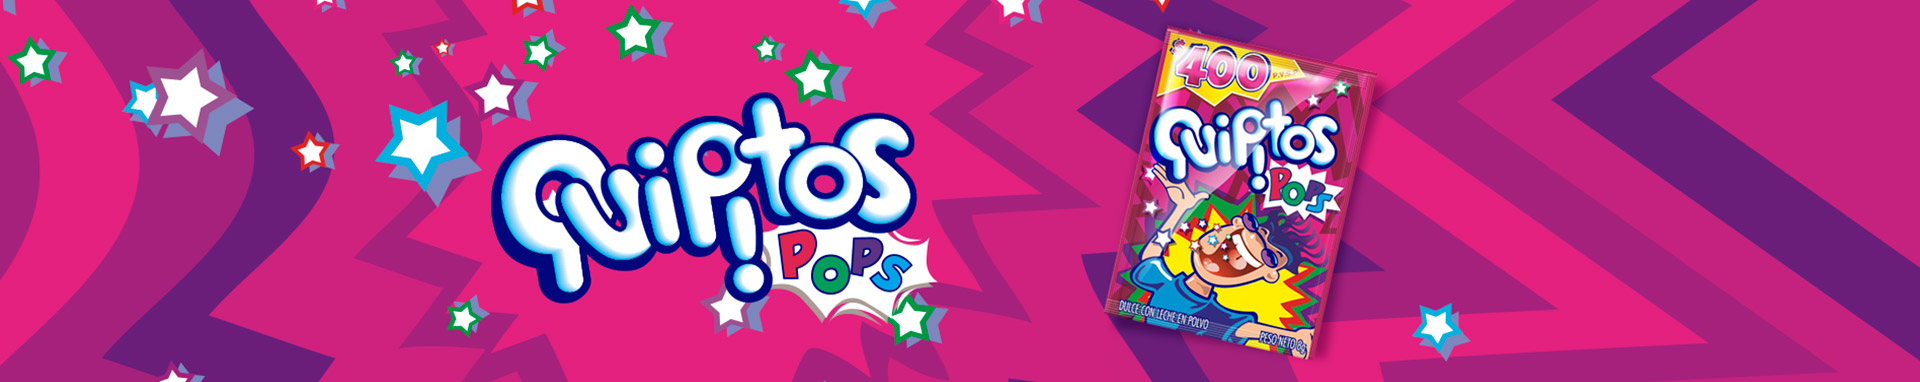 Banners_quipitos